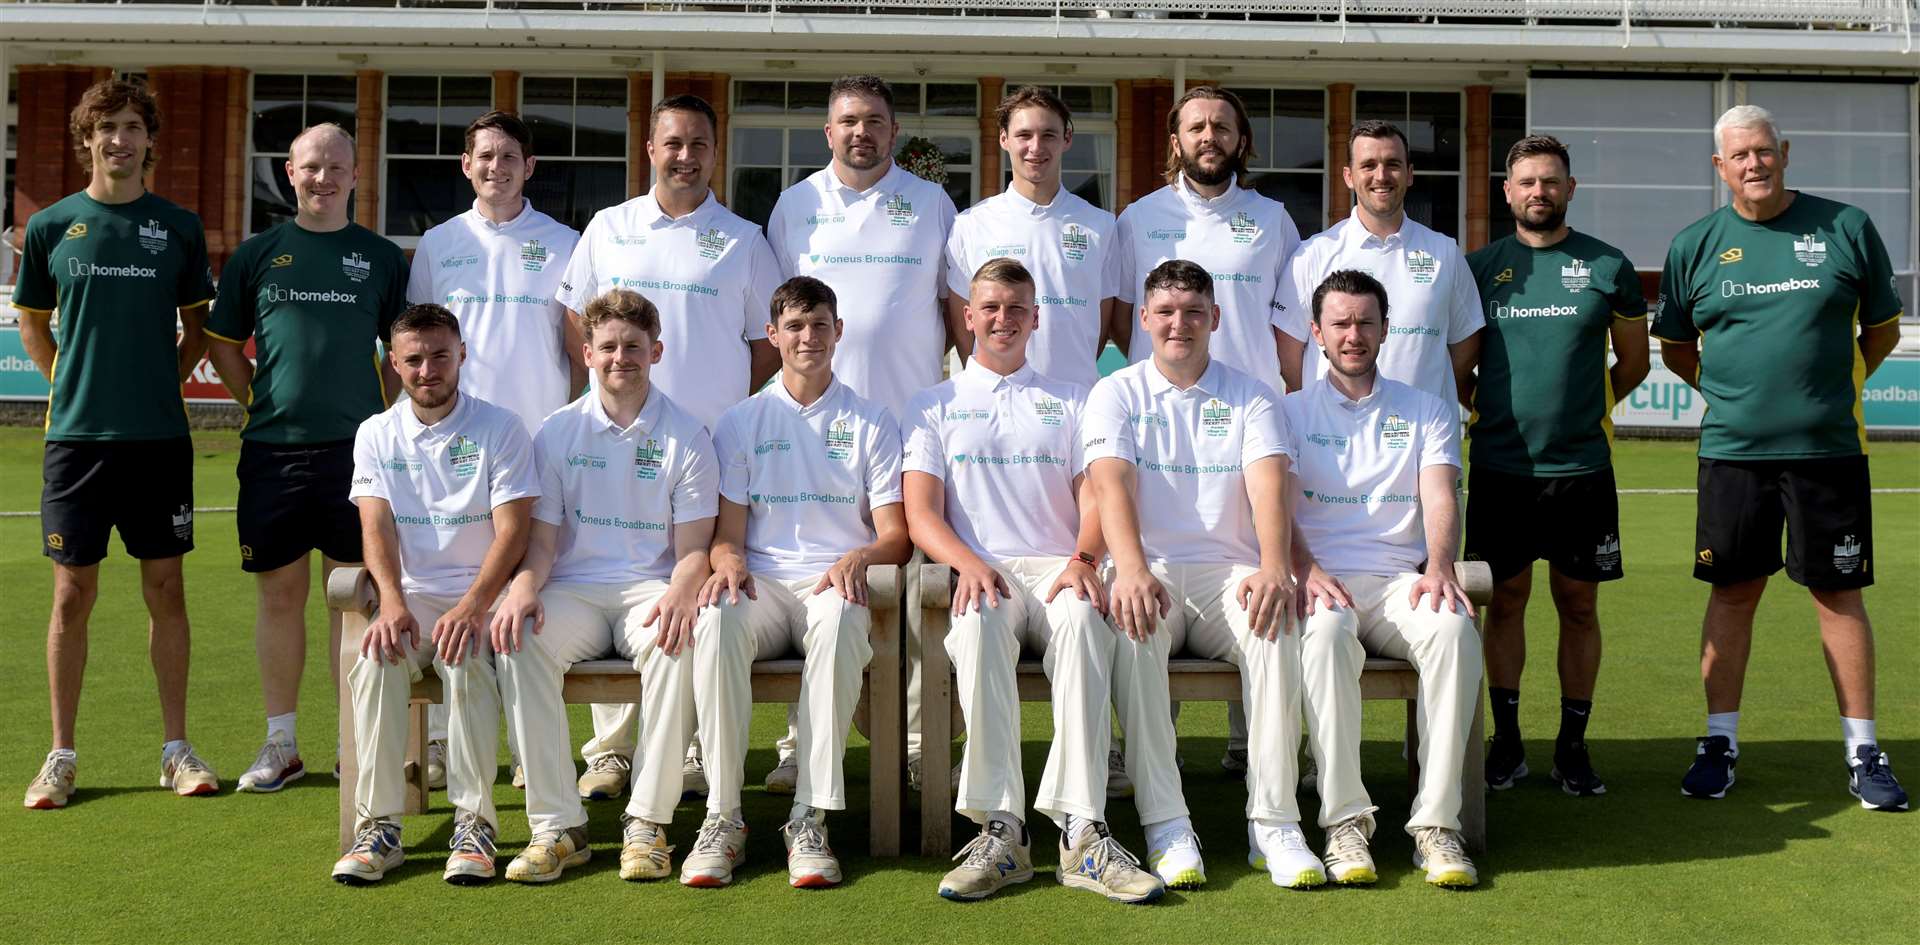 Leeds & Broomfield reached last season's Voneus Village Cup Final at Lord's. Picture: Barry Goodwin